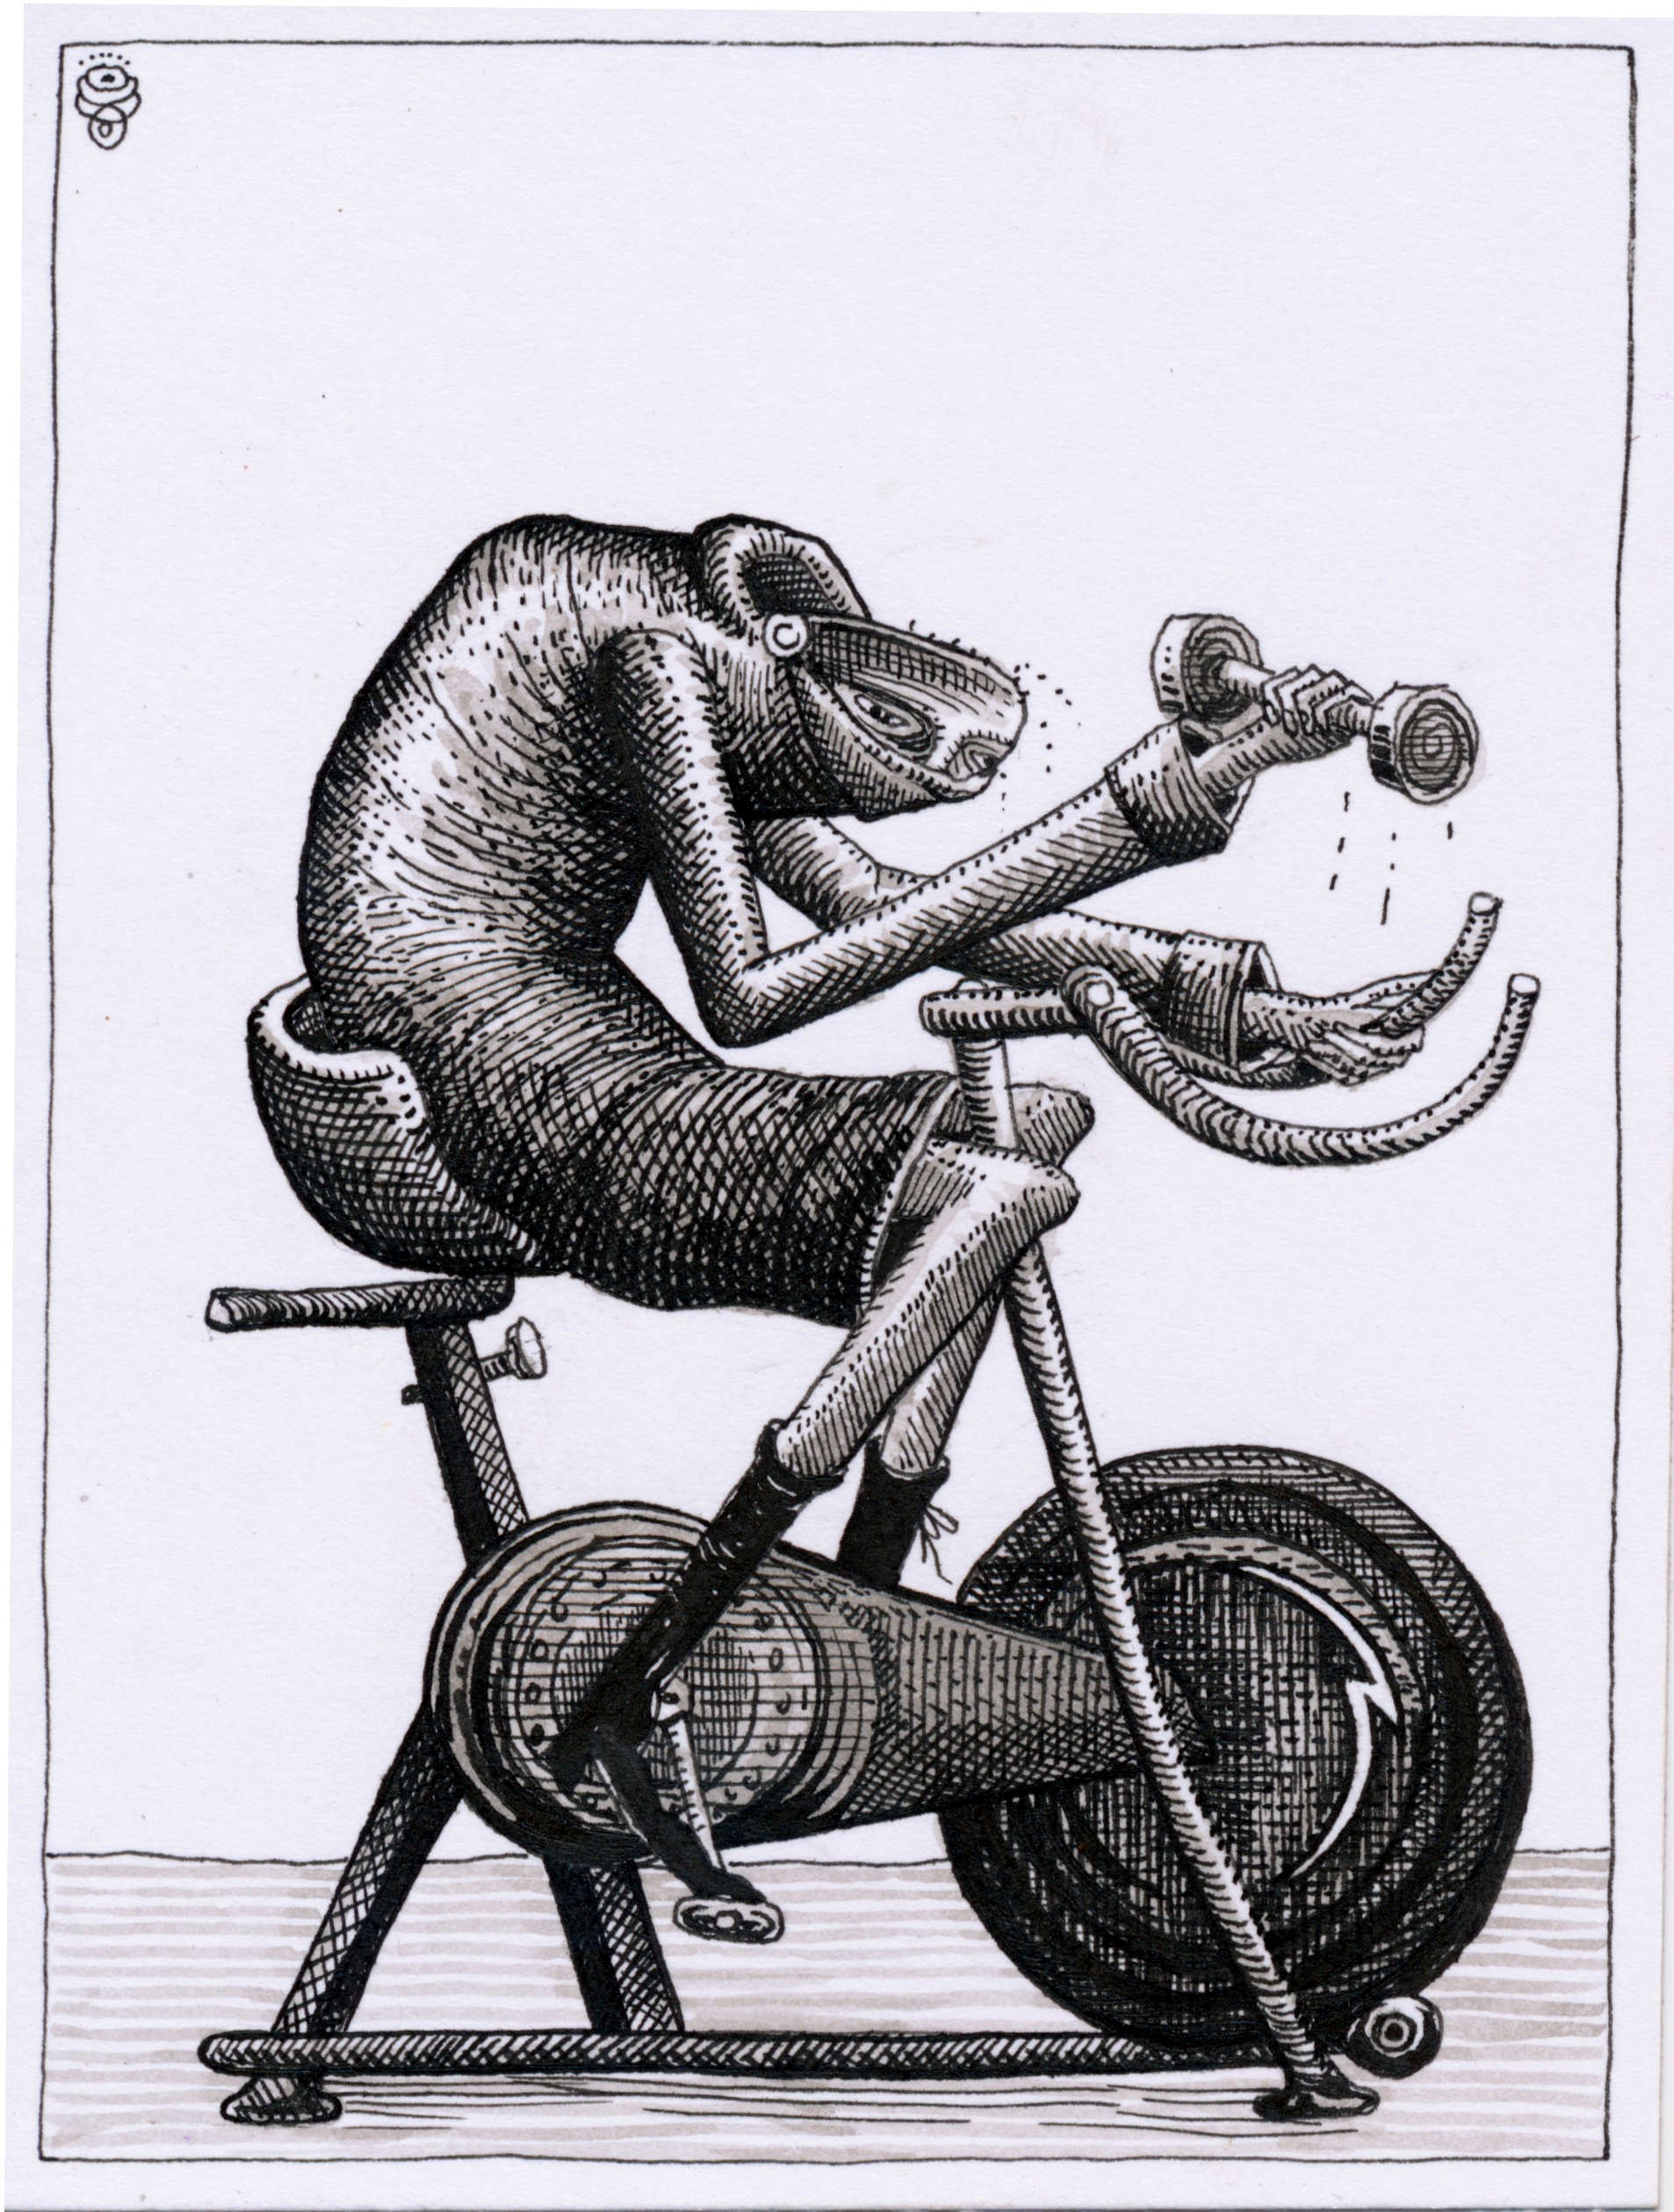 A pen and ink drawing of a human-like figure on an exercise bike holding a dumbbell. 